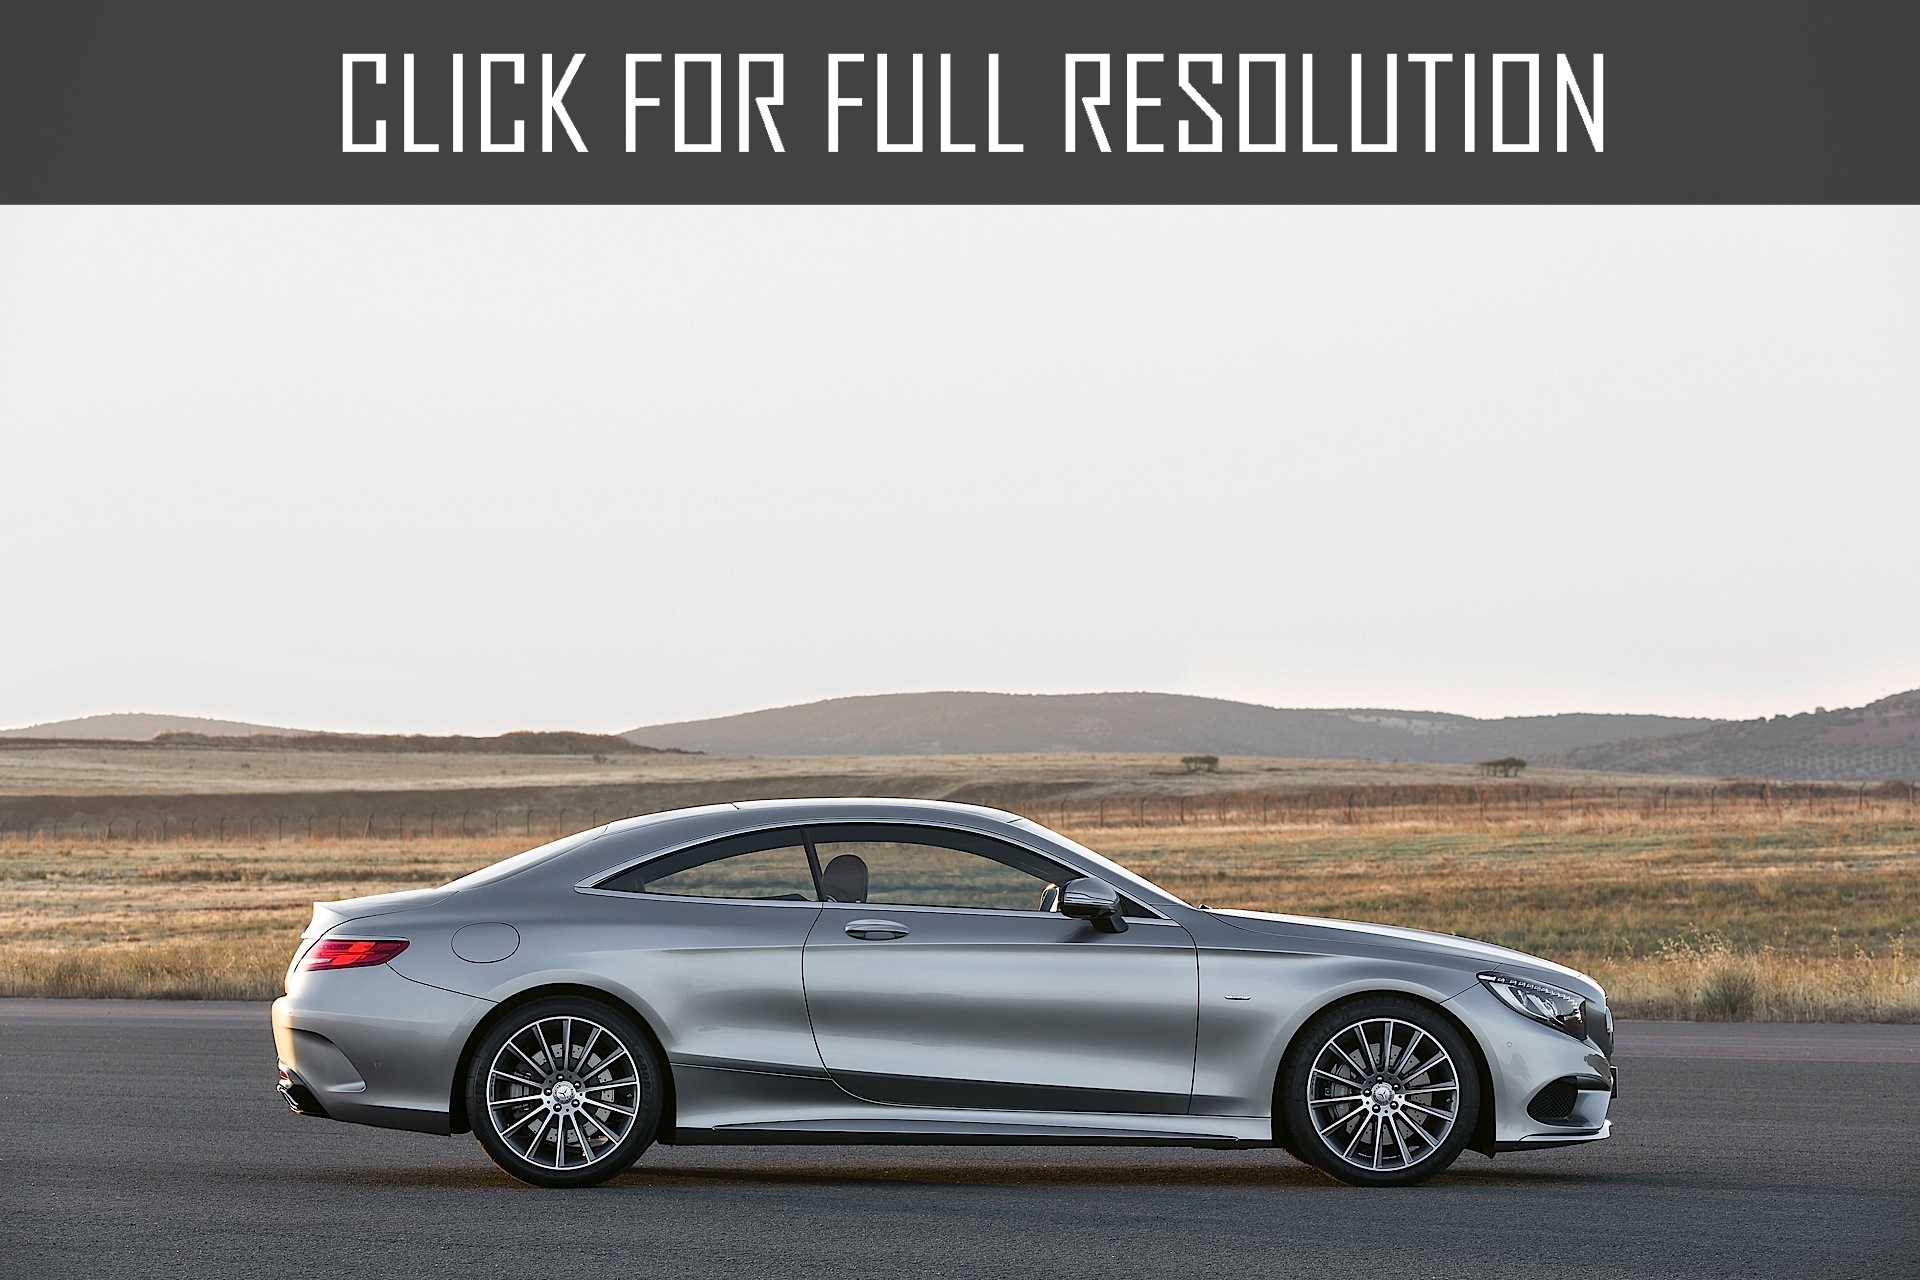 Mercedes Benz S Class Coupe 2016